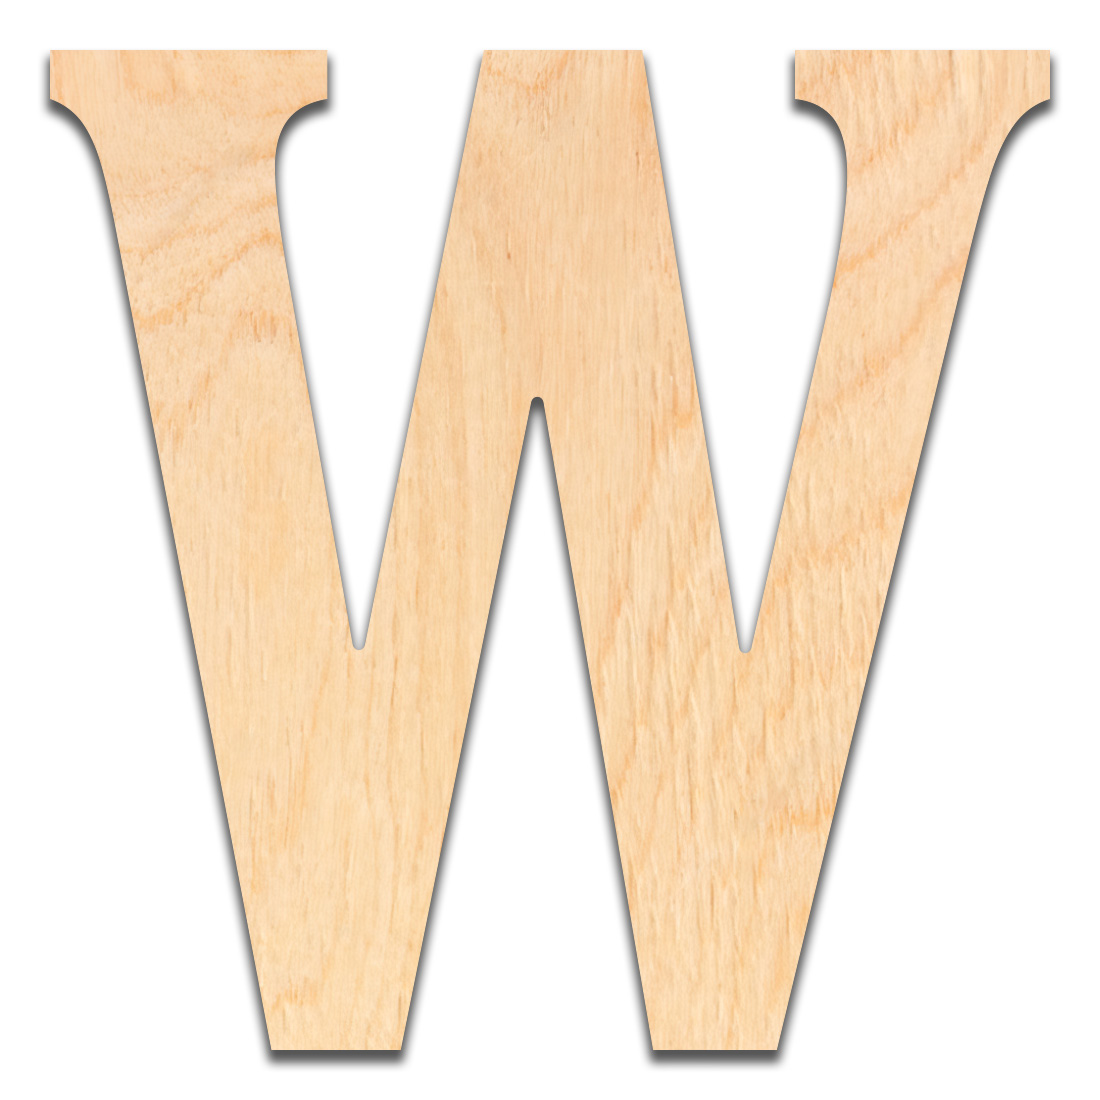 6 inch Wooden Letter W Ready for Painting or Decorating, Size: 6 Tall x 6 Wide x 1/4 Thick, Beige